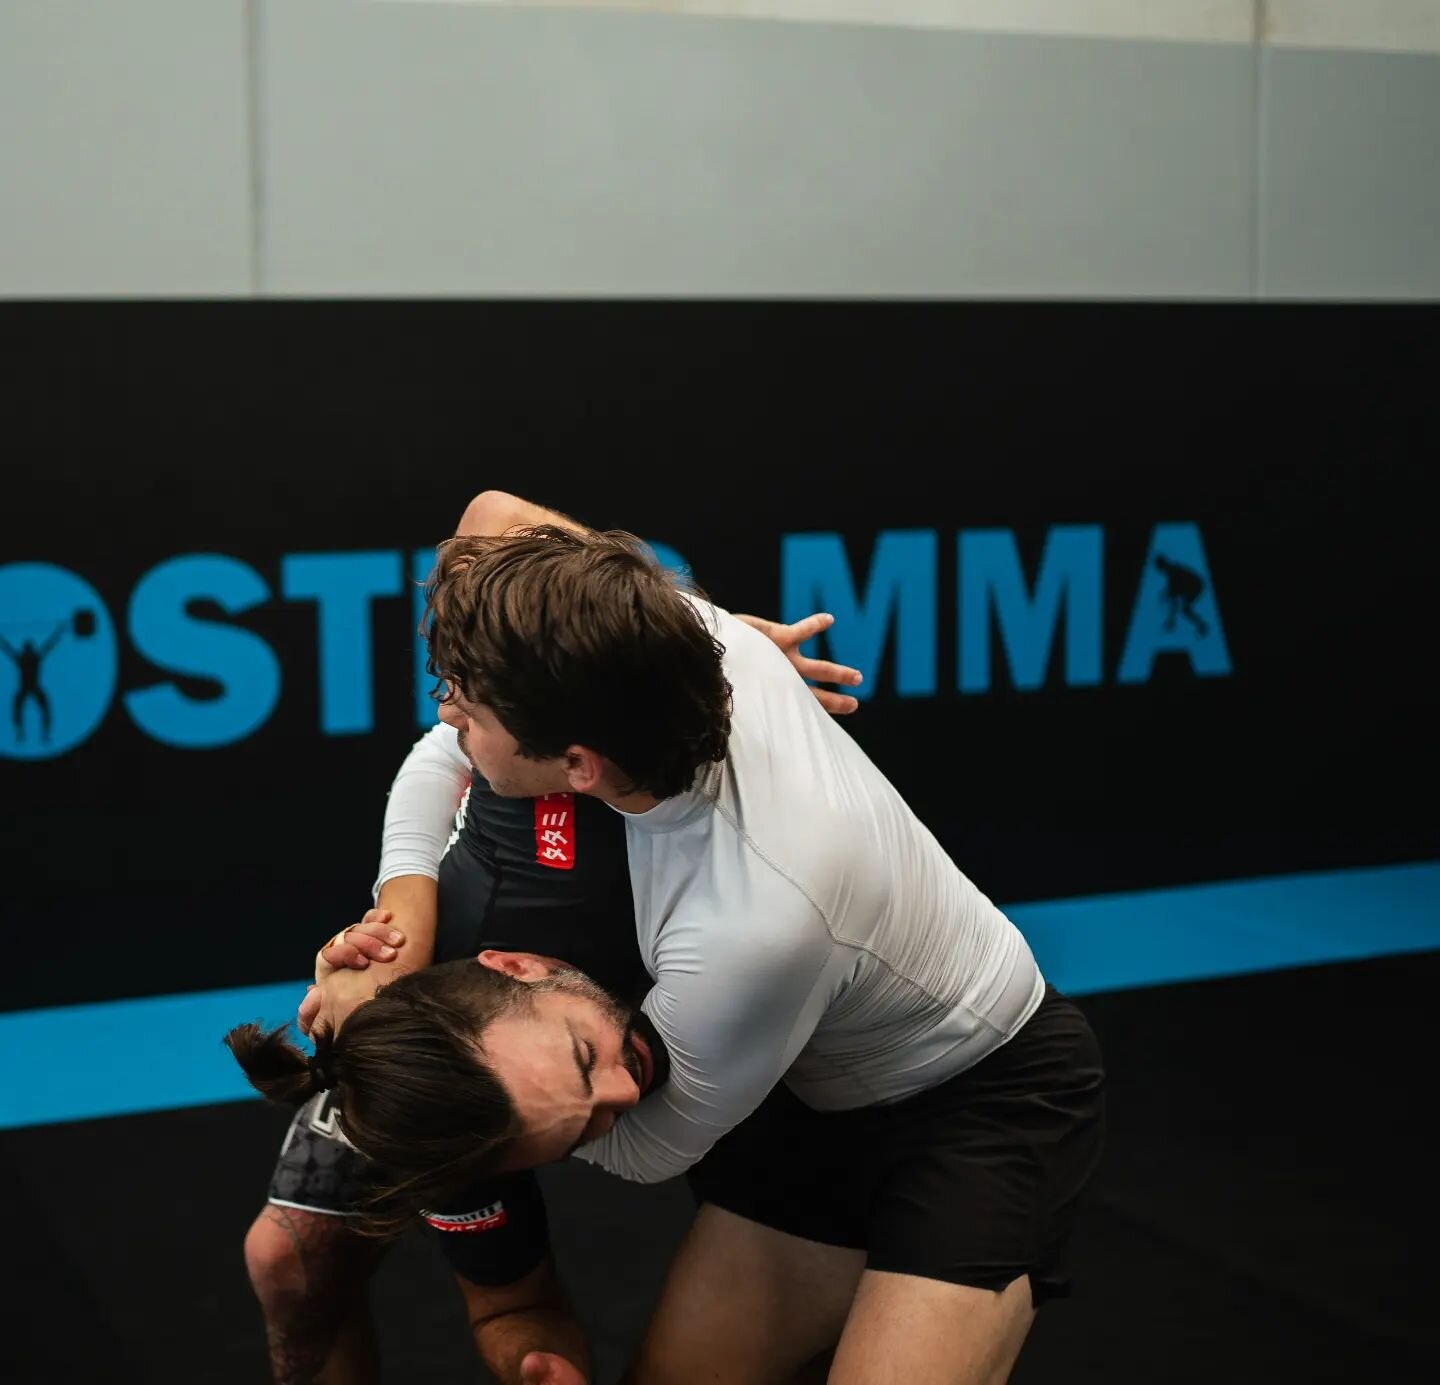 New at Brazilian Jiu Jitsu? The most common thing for white belts is they actually can unintentionally actually injure themselves...

If you're having a conversation or disagreement with someone but you're only screaming at 100% at them, yelling at t